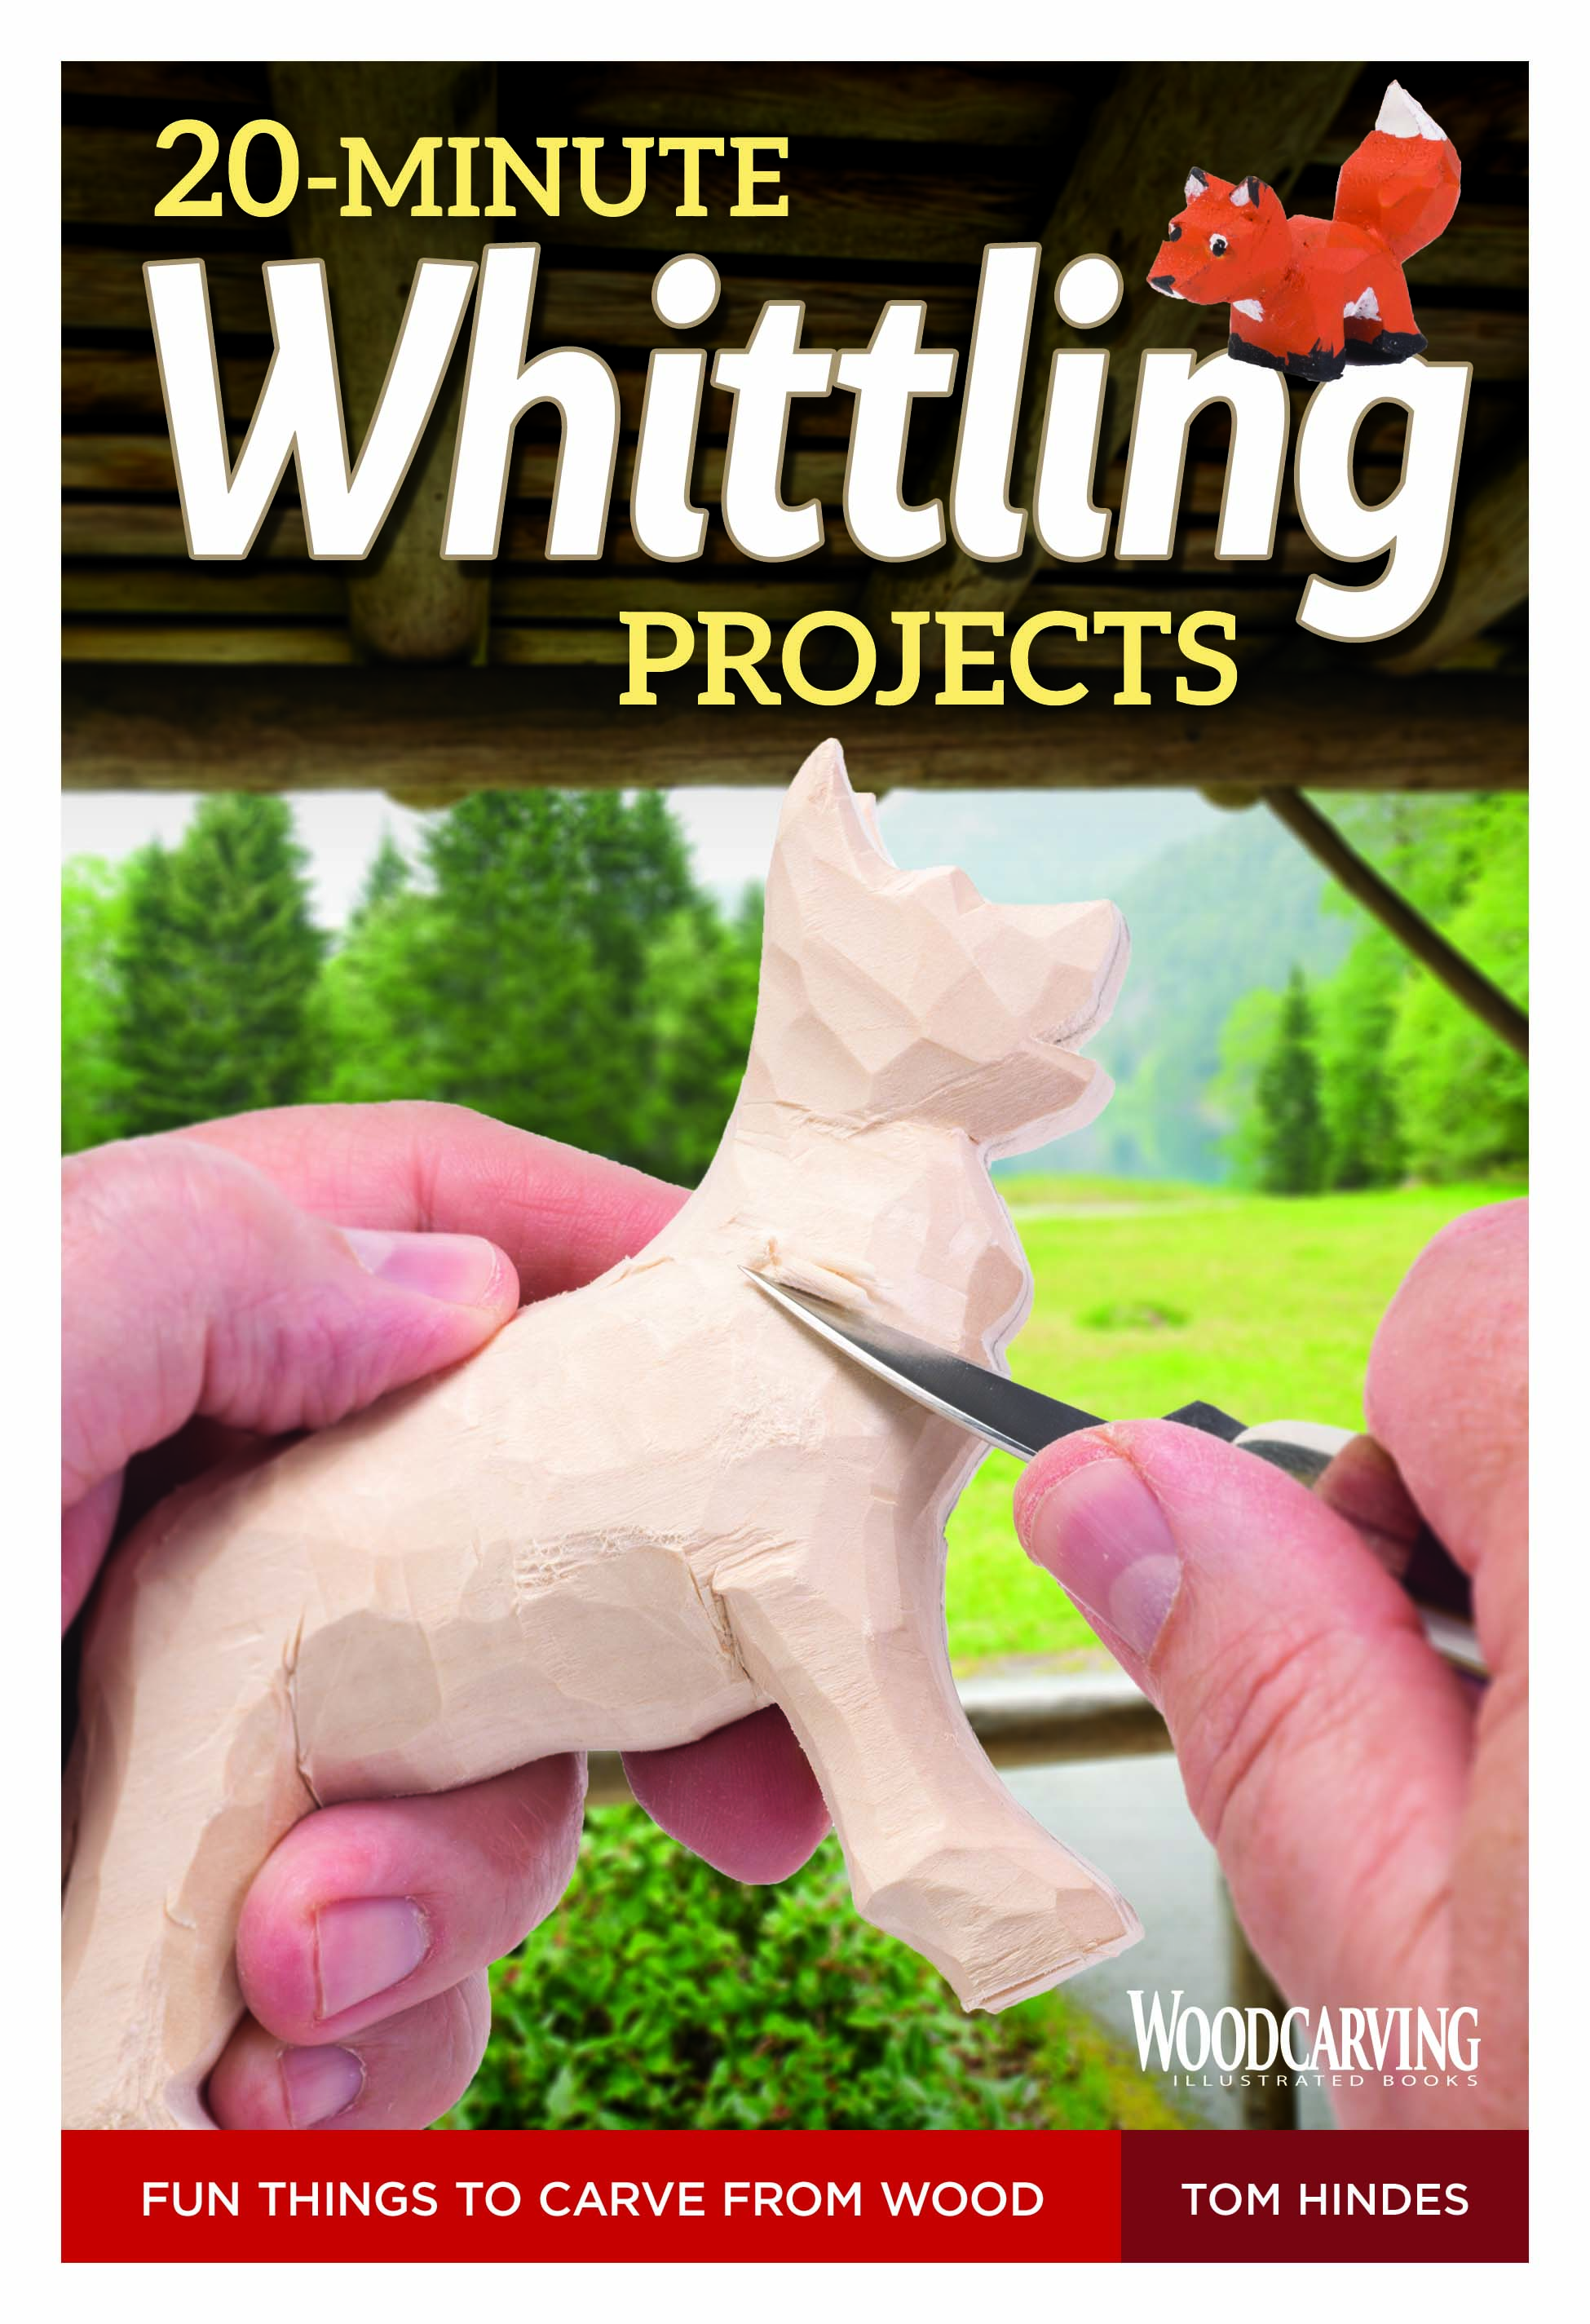 Book Corner: Cover Shoot for 20-Minute Whittling Projects